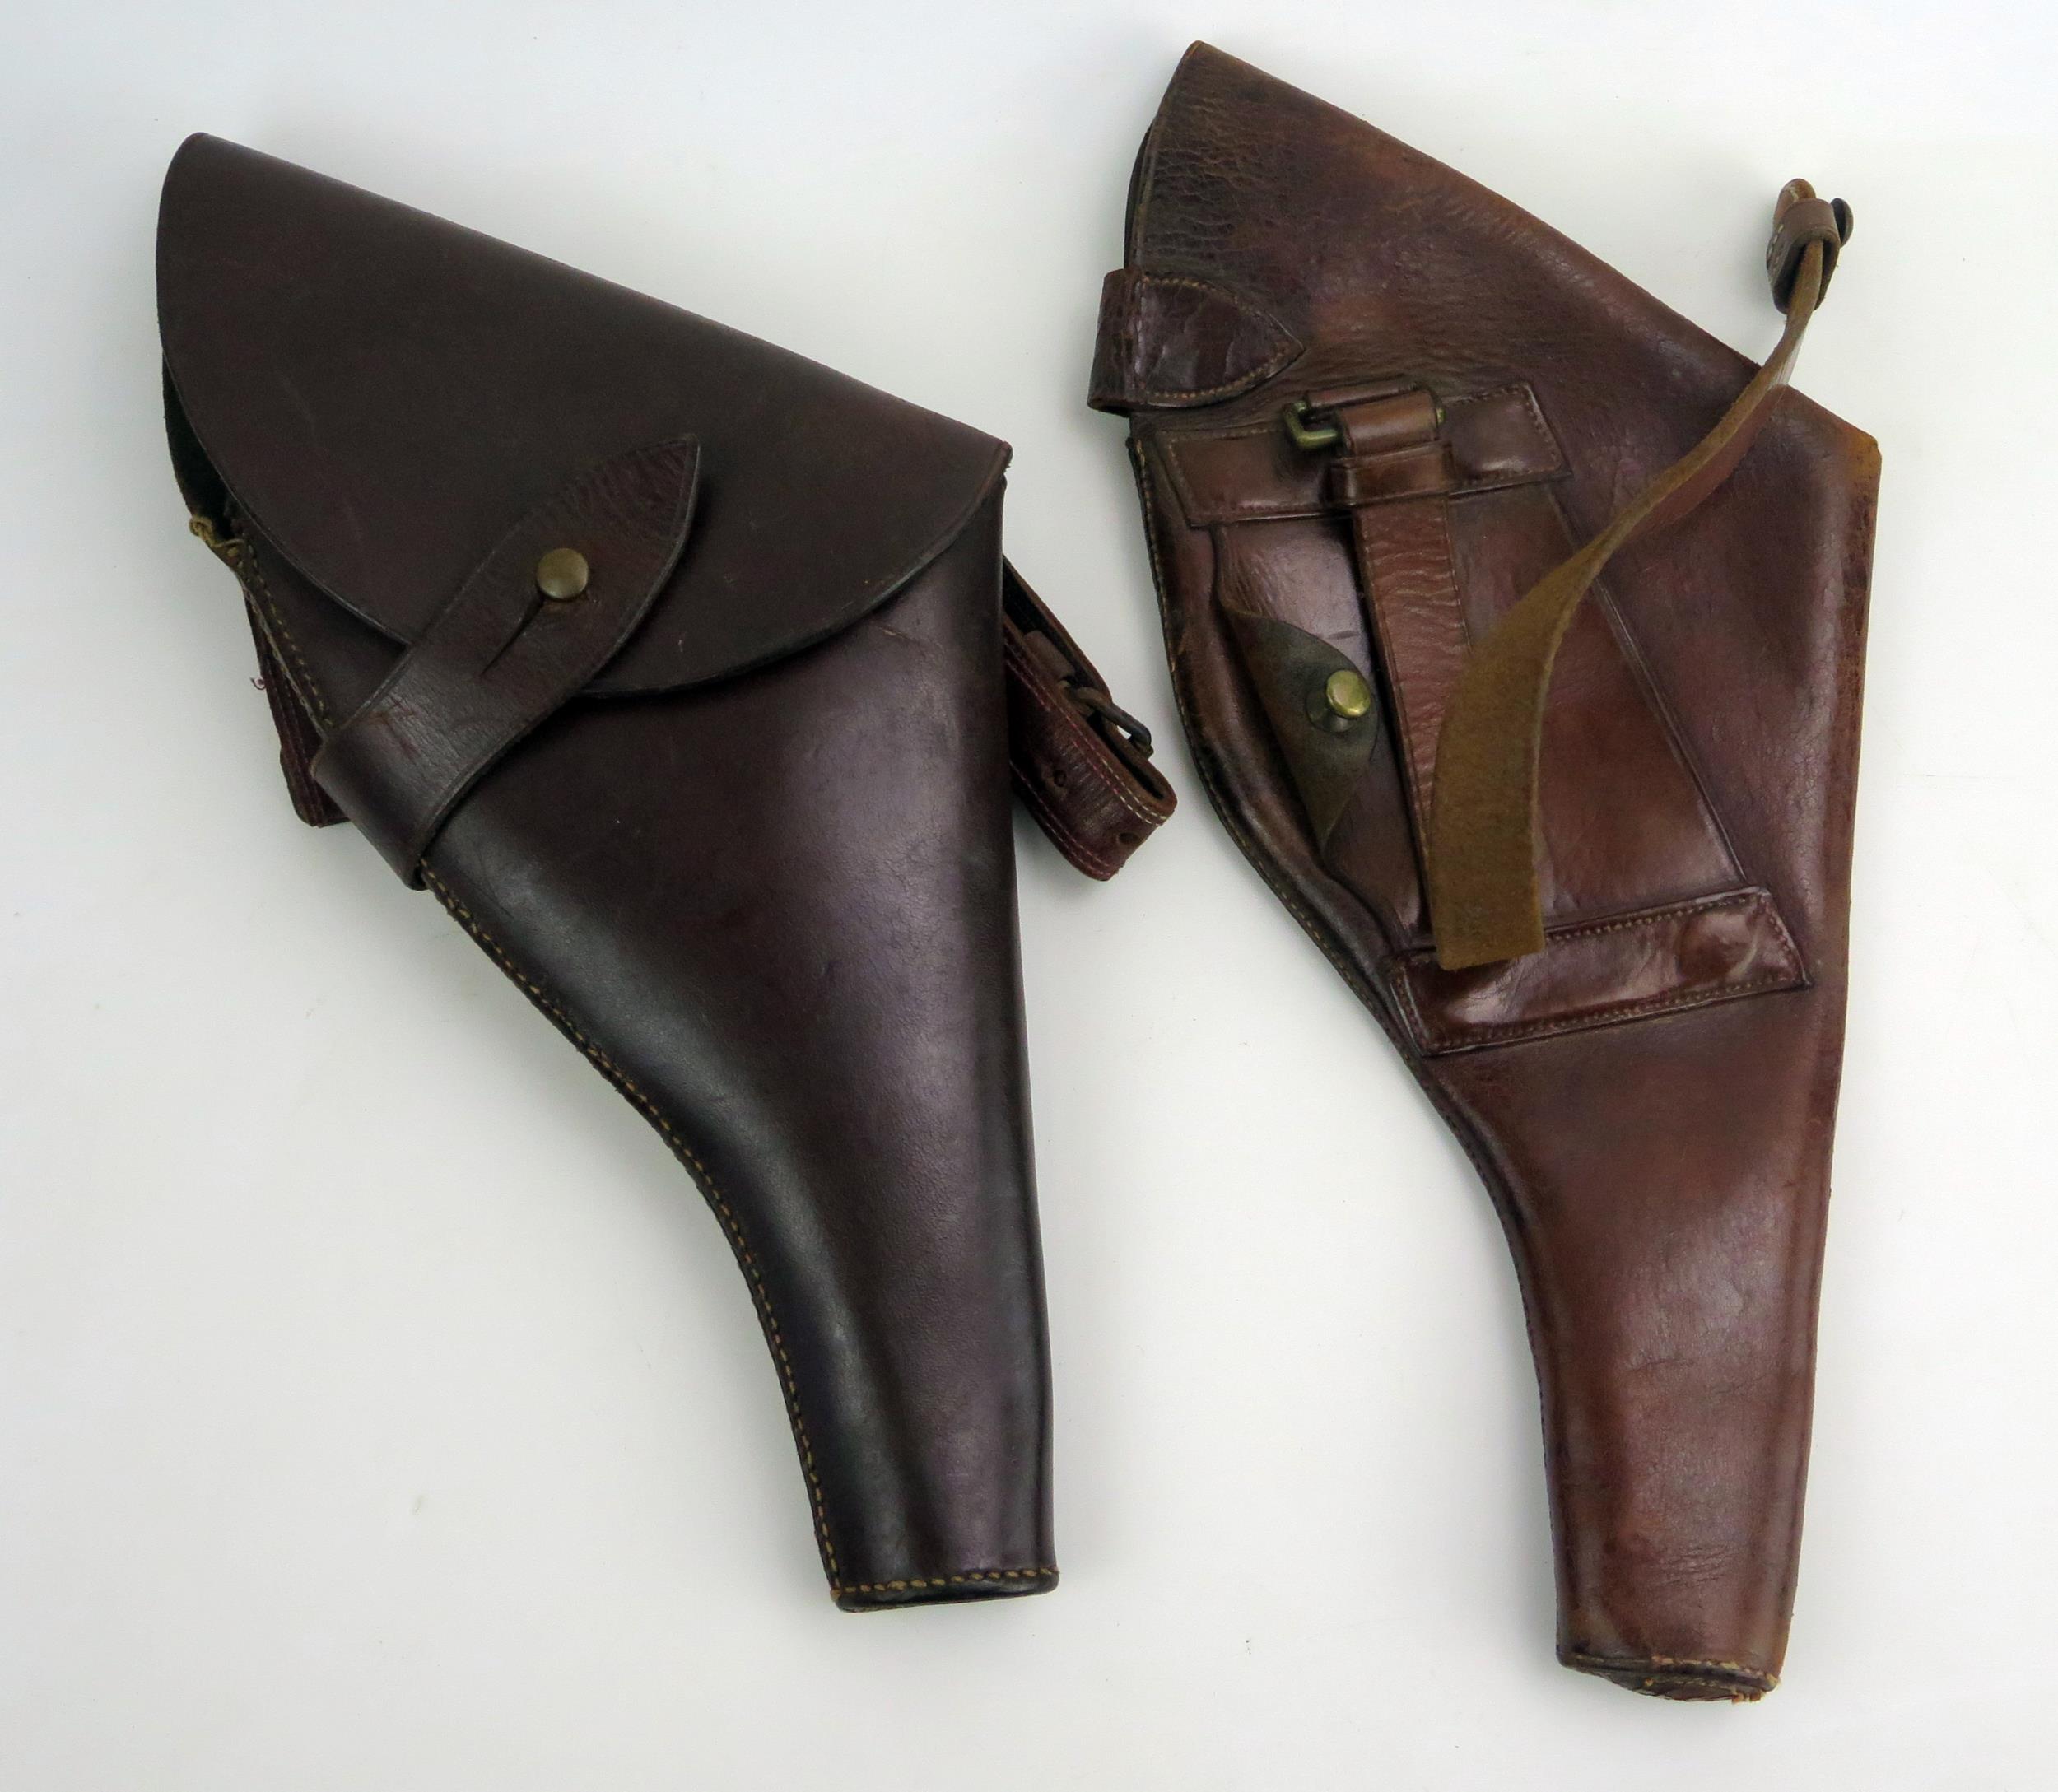 A World War One period, British Army Officer's leather Webley holster, together with another similar